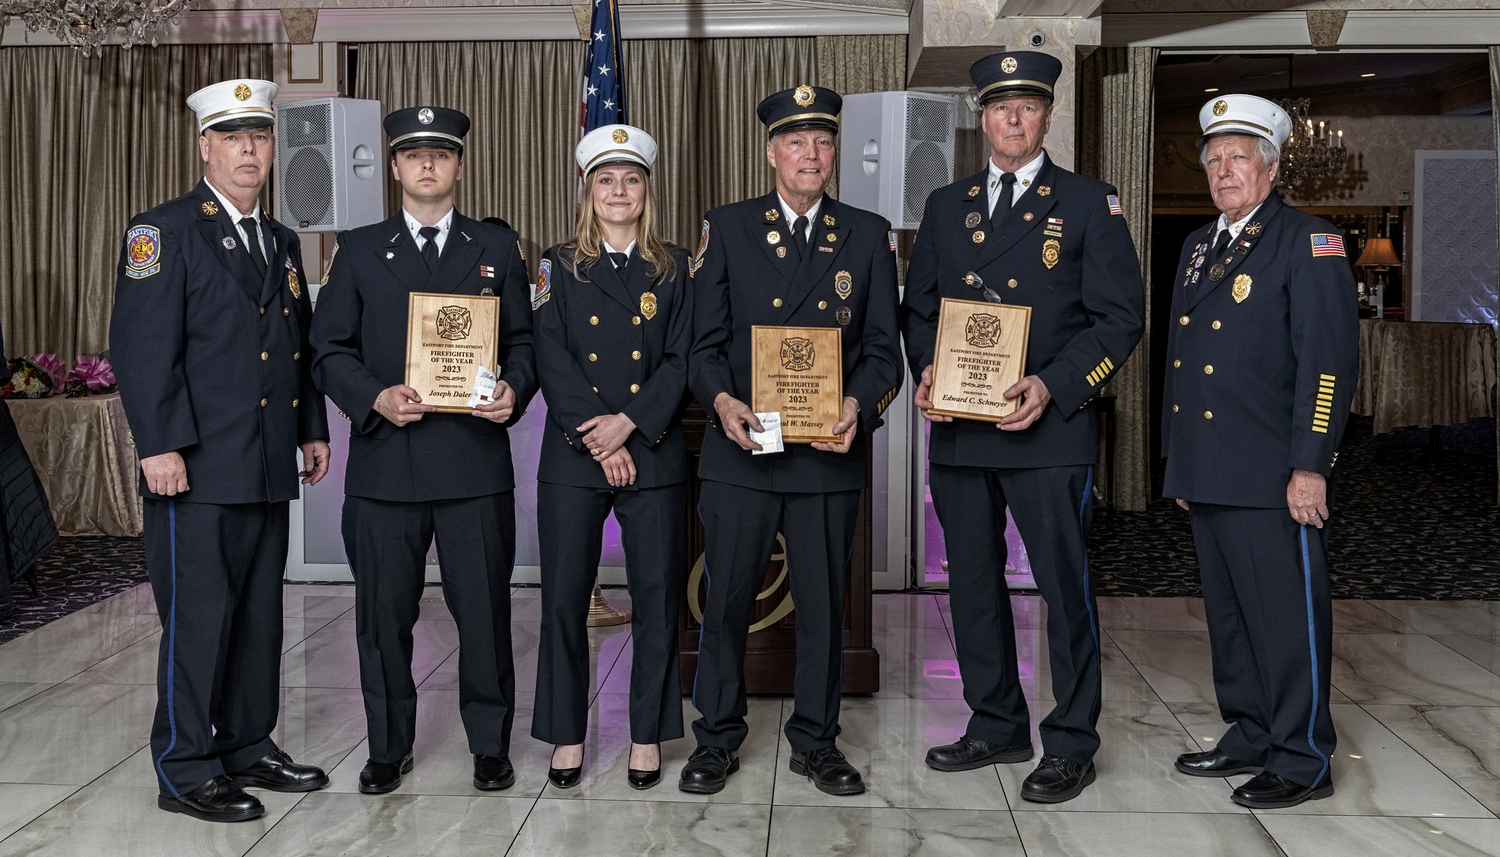 Joseph Dalen, Paul Massey, and Edward Schneyer, holding plaques, shared honors as the Firefighters of the Year at the Eastport Fire Department's 2024 Installation Dinner at Georgio’s in Calverton on  April 13.    COURTESY EASTPORT FIRE DEPARTMENT